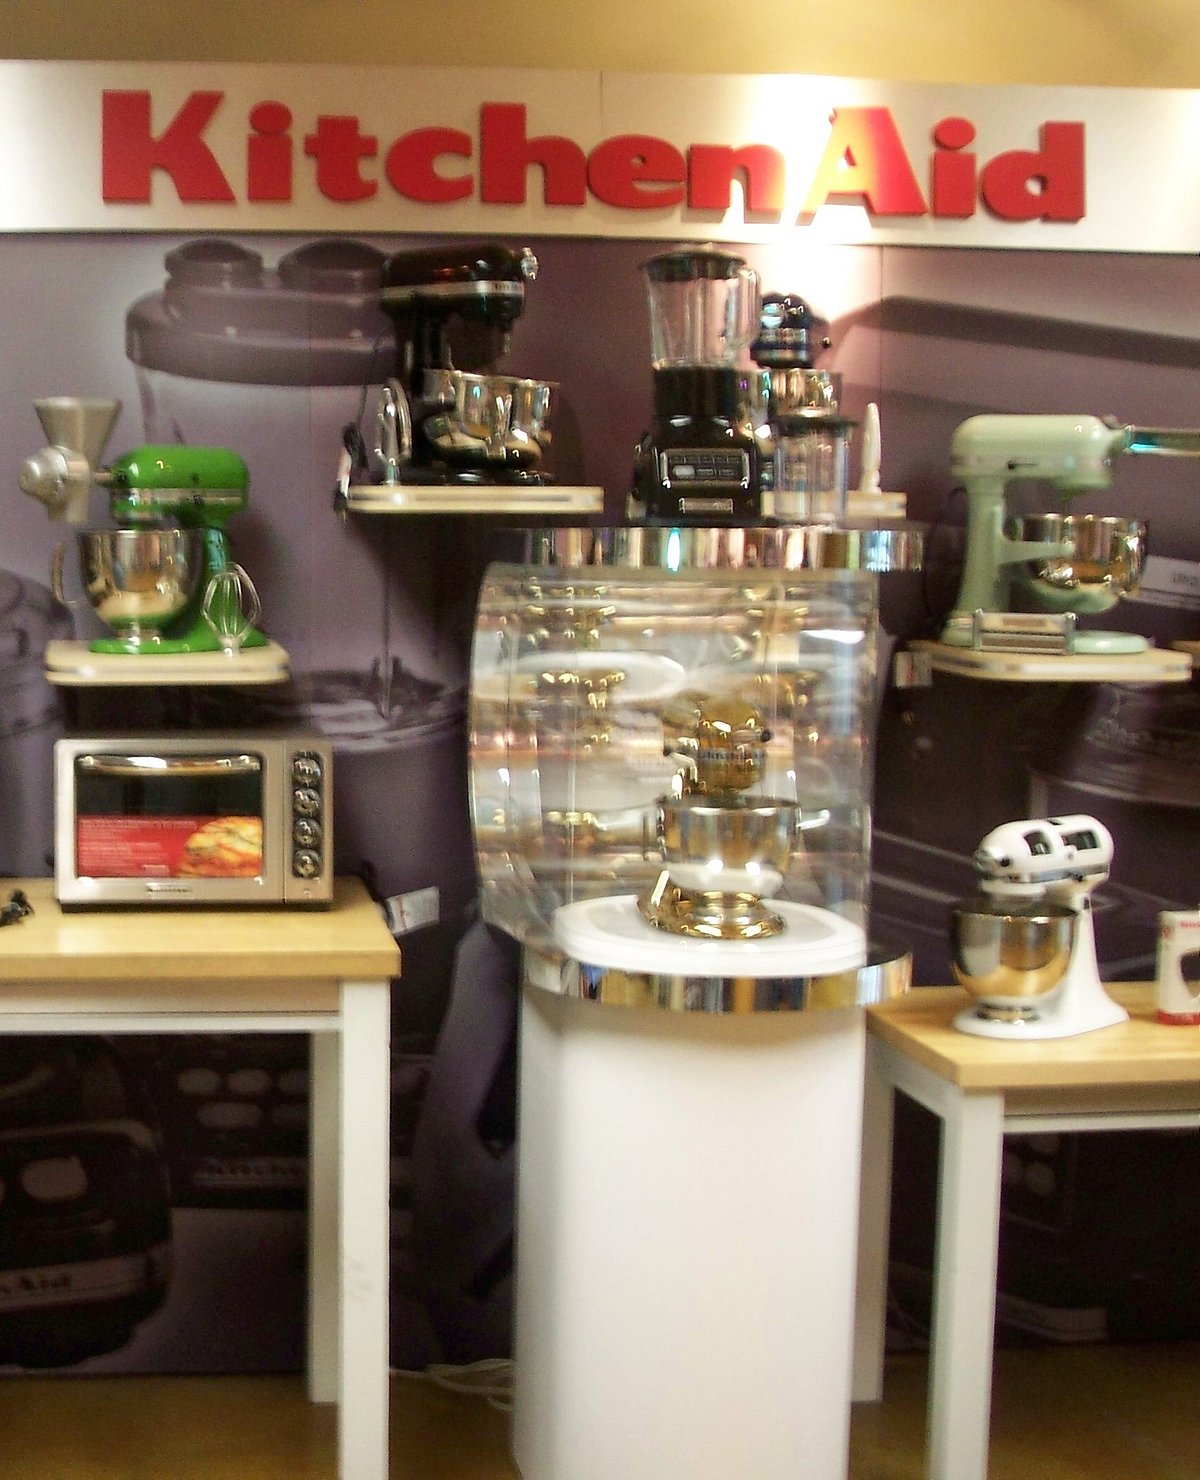 How KitchenAid Mixers Are Made - KitchenAid Greenville Factory Tour